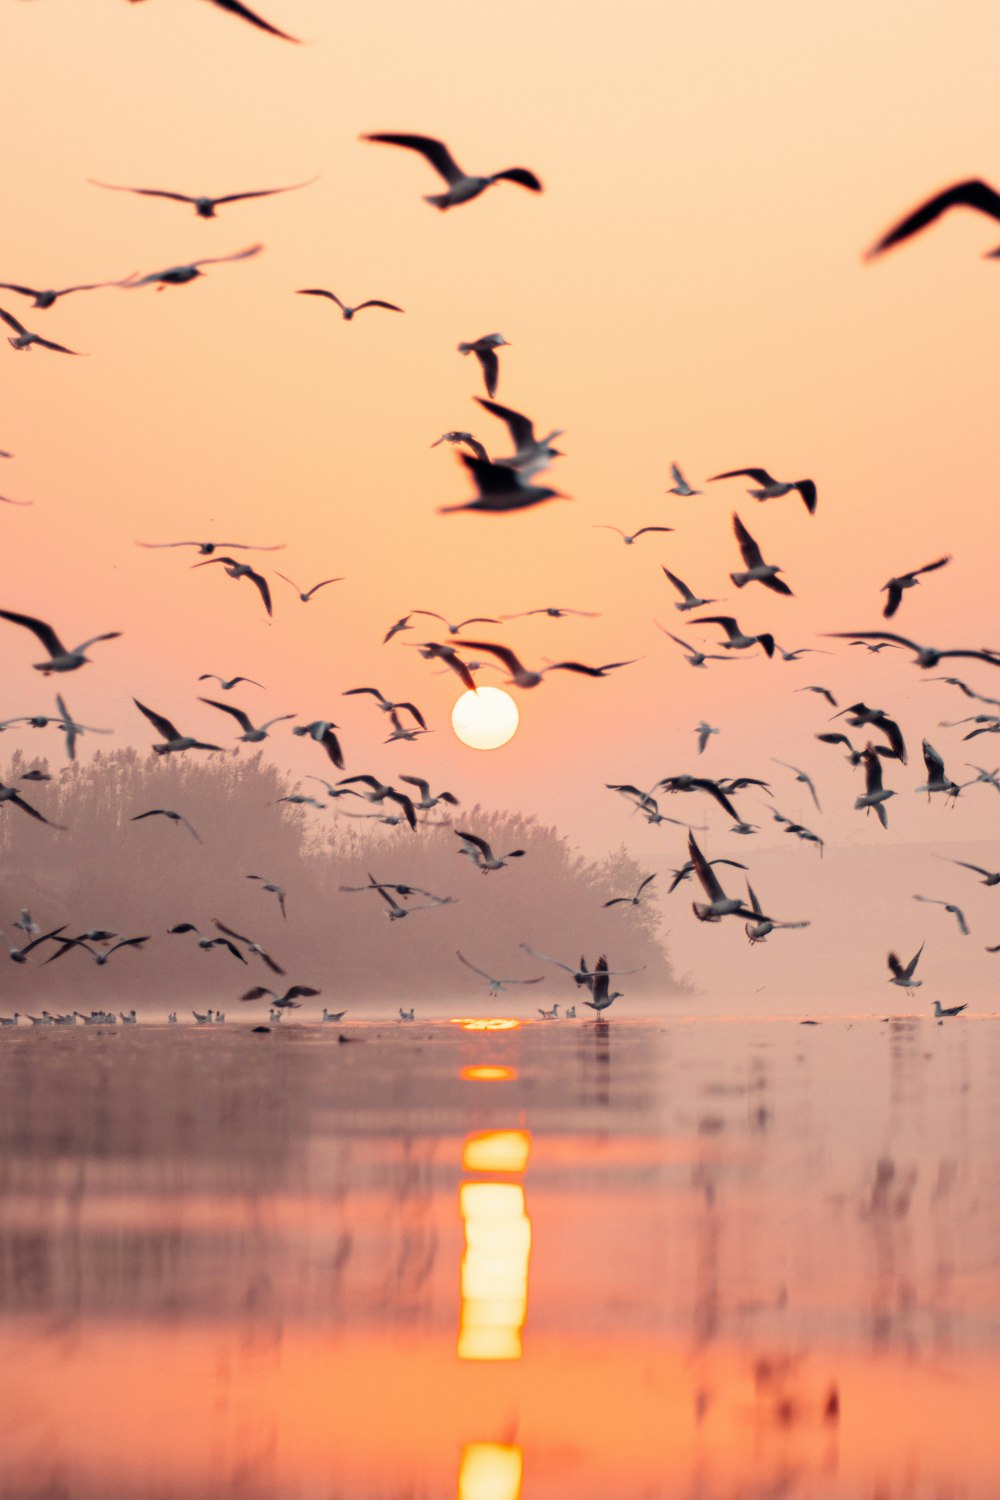 a flock of birds flying over a body of water